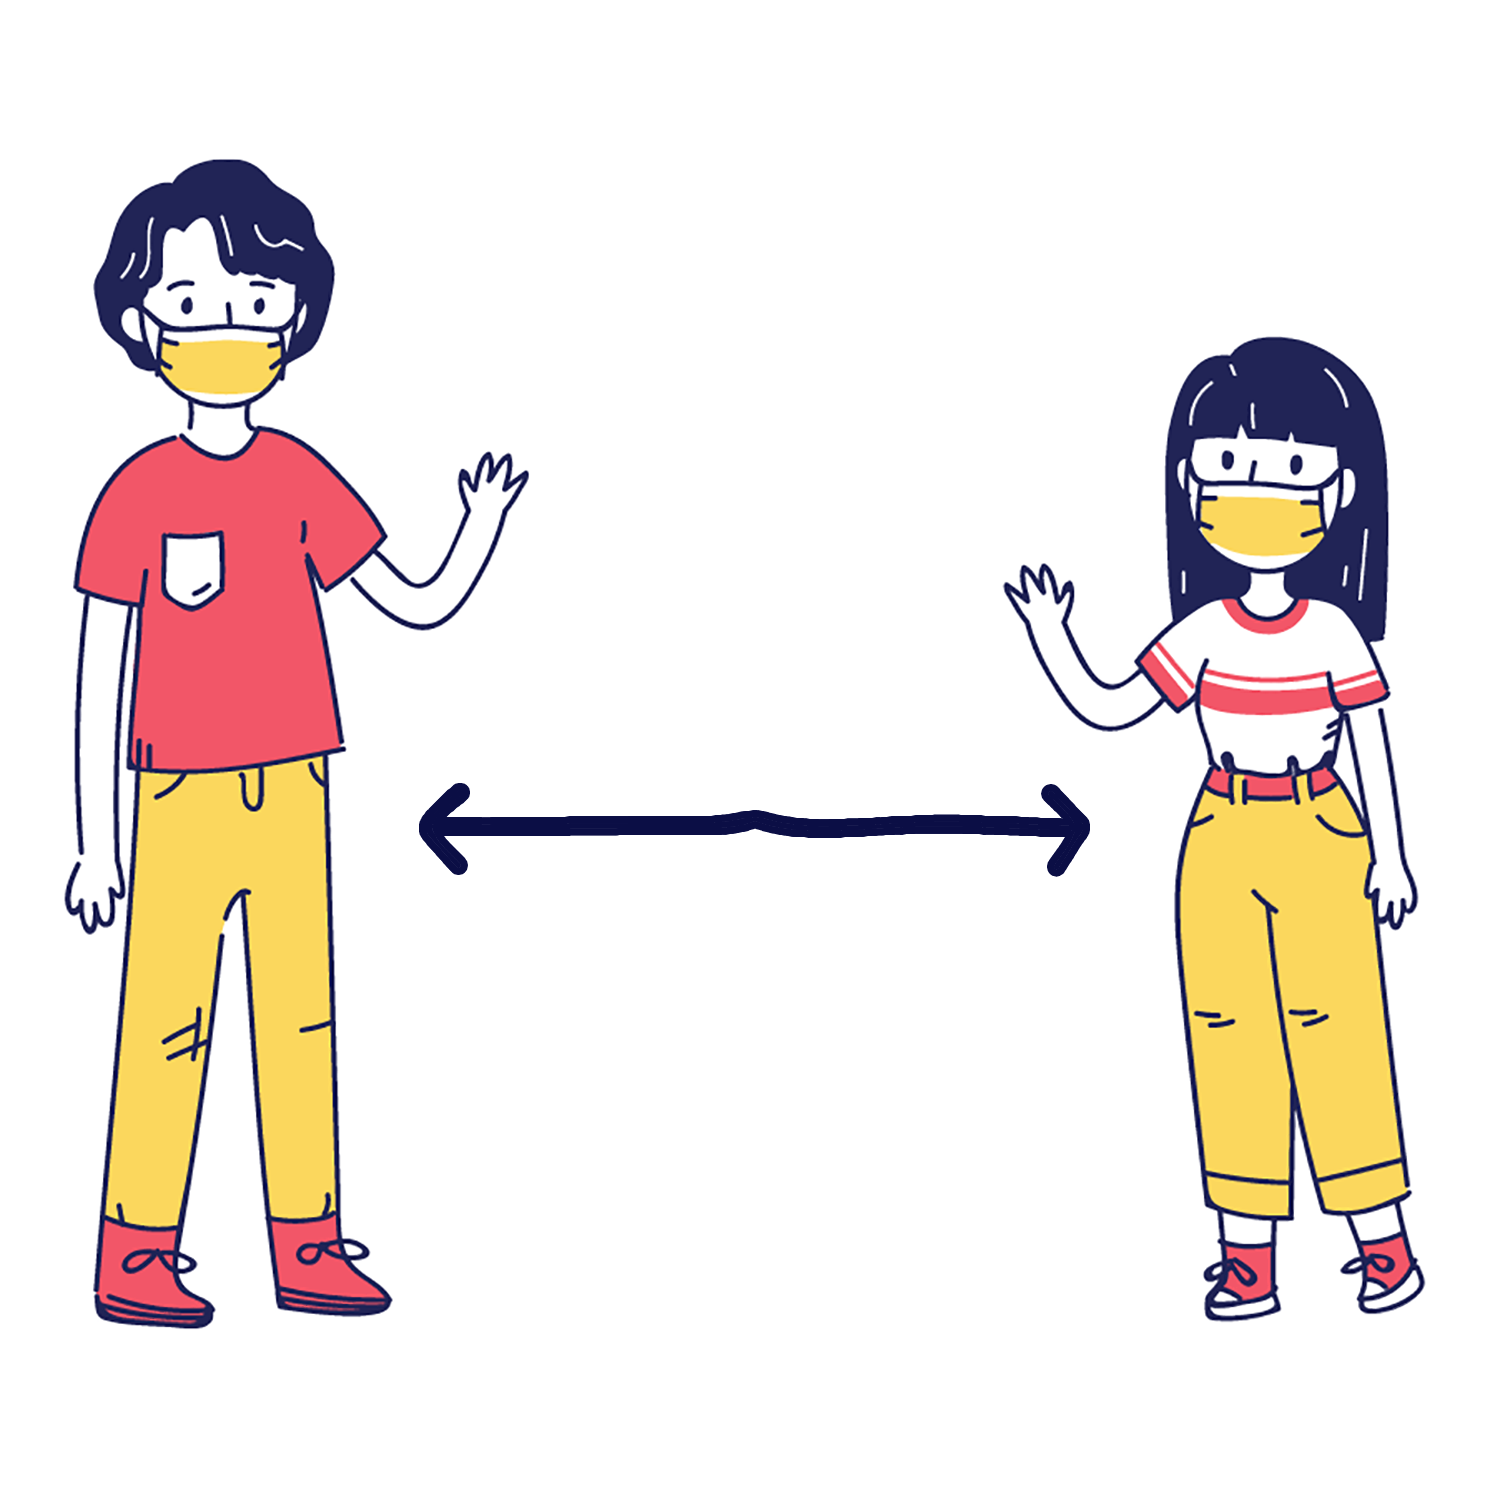 Illustration of a boy and girl social distancing with an arrow between them